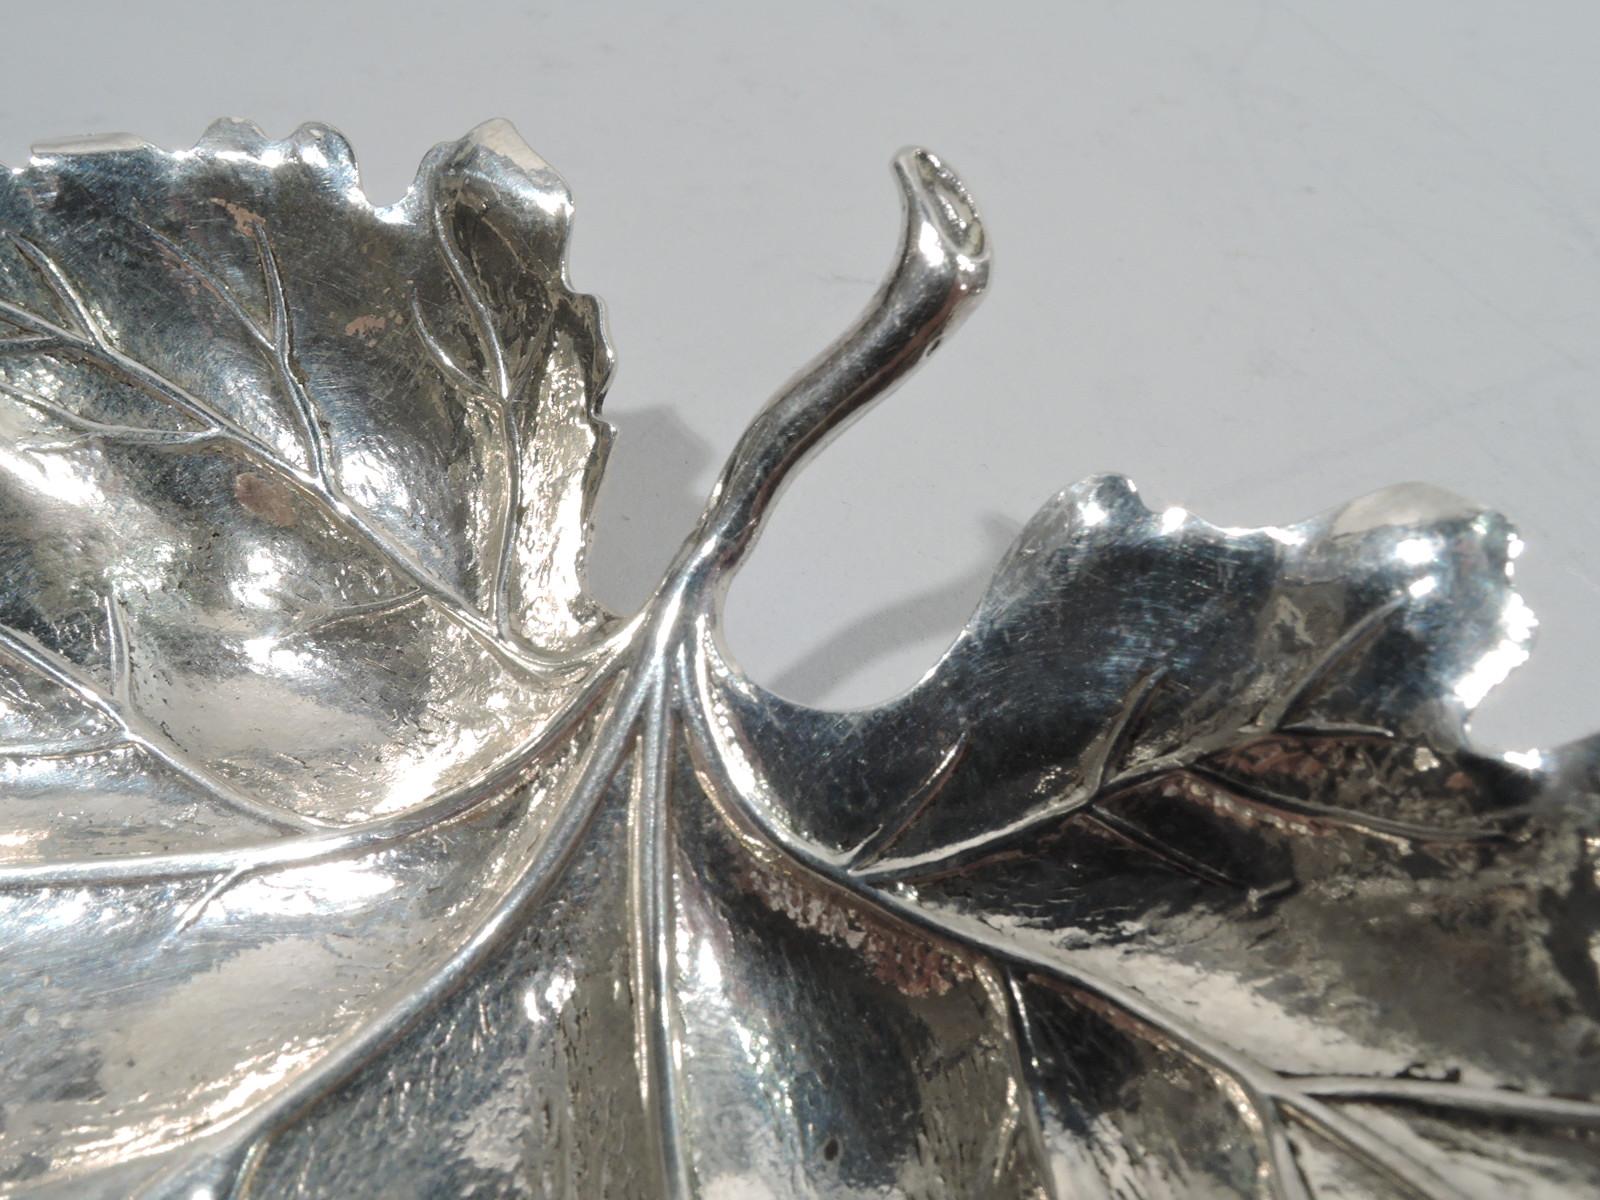 Stylish sterling silver leaf dish. Realistic with tooled ground, chased veins, irregular wispy tips, and stem. Fully marked with Gianmaria Bucellati and post-1967 Clementi di Giovanni Mantel stamps. Weight: 2.2 troy ounces.